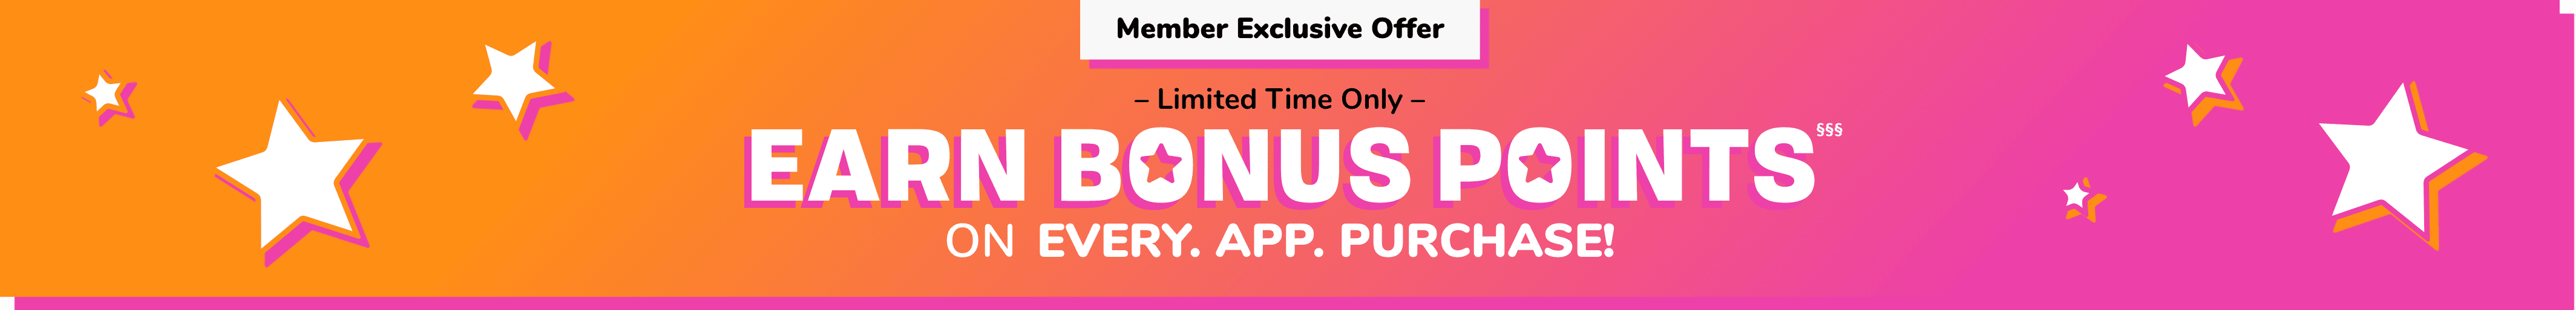 Member Exclusive Offer. Limited Time Only. EARN POINTS ON EVERY. APP. PURCHASE 